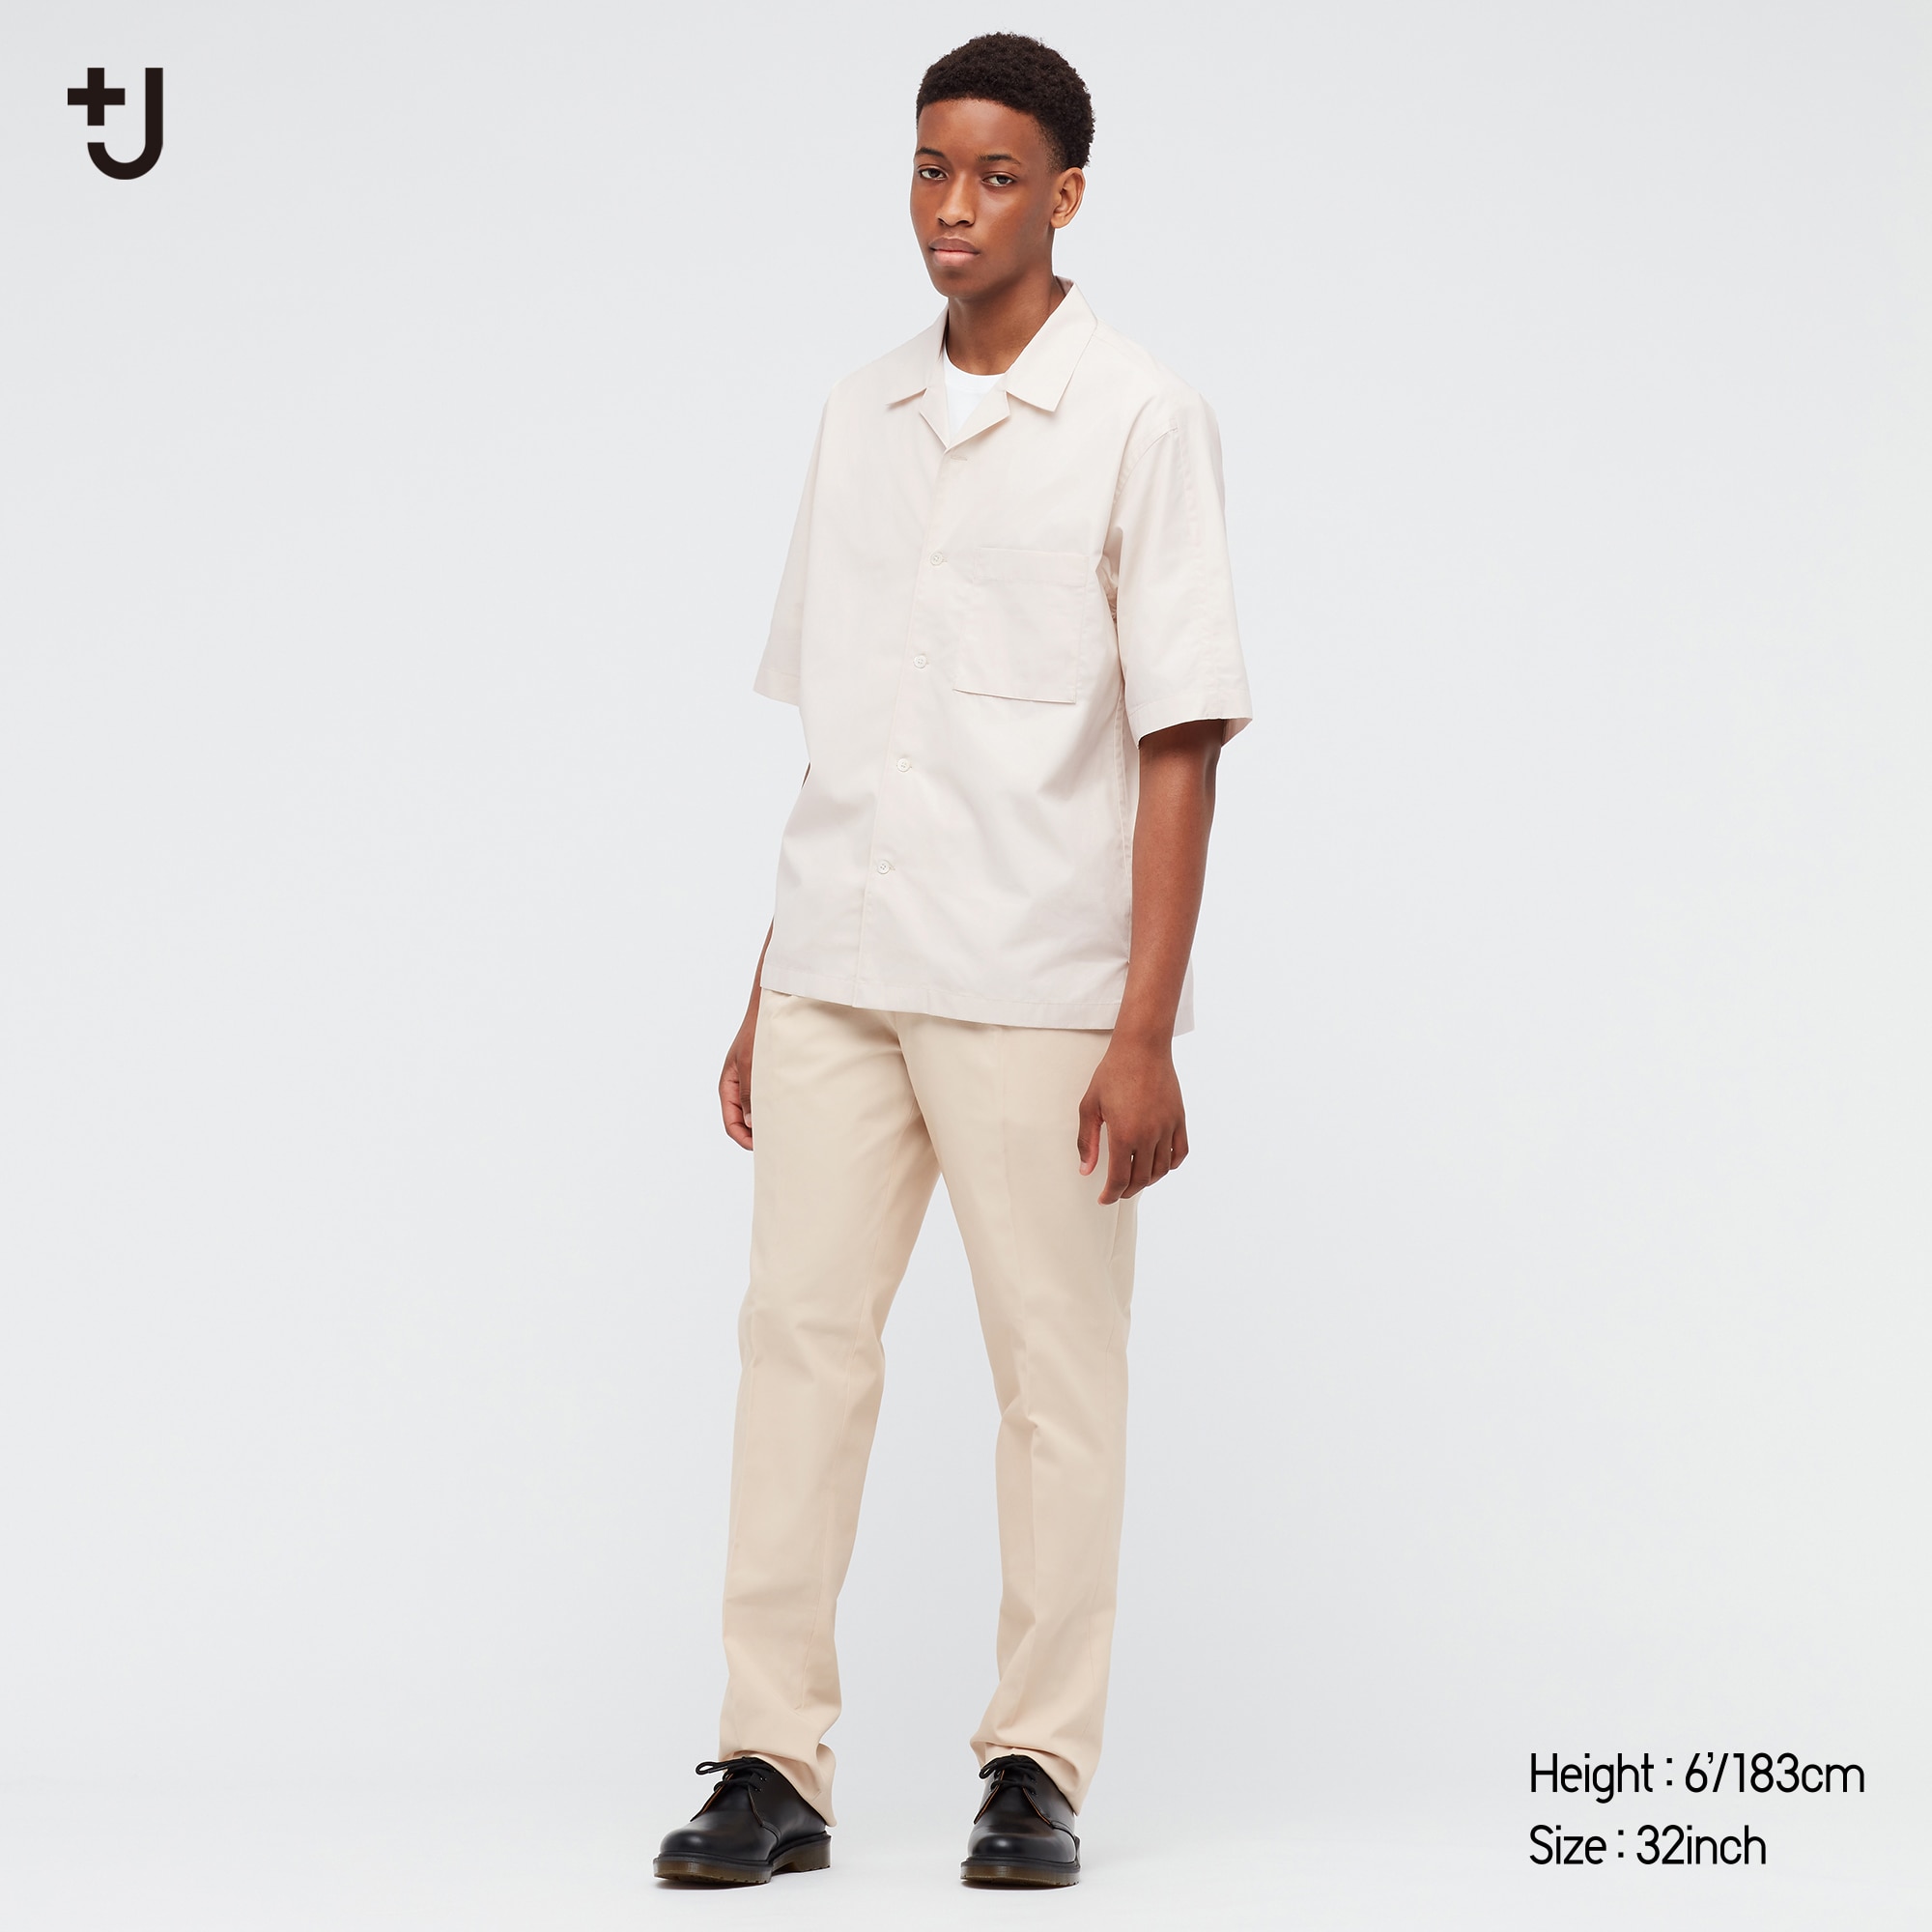 HEATTECH Pleated Tapered Pants, UNIQLO US